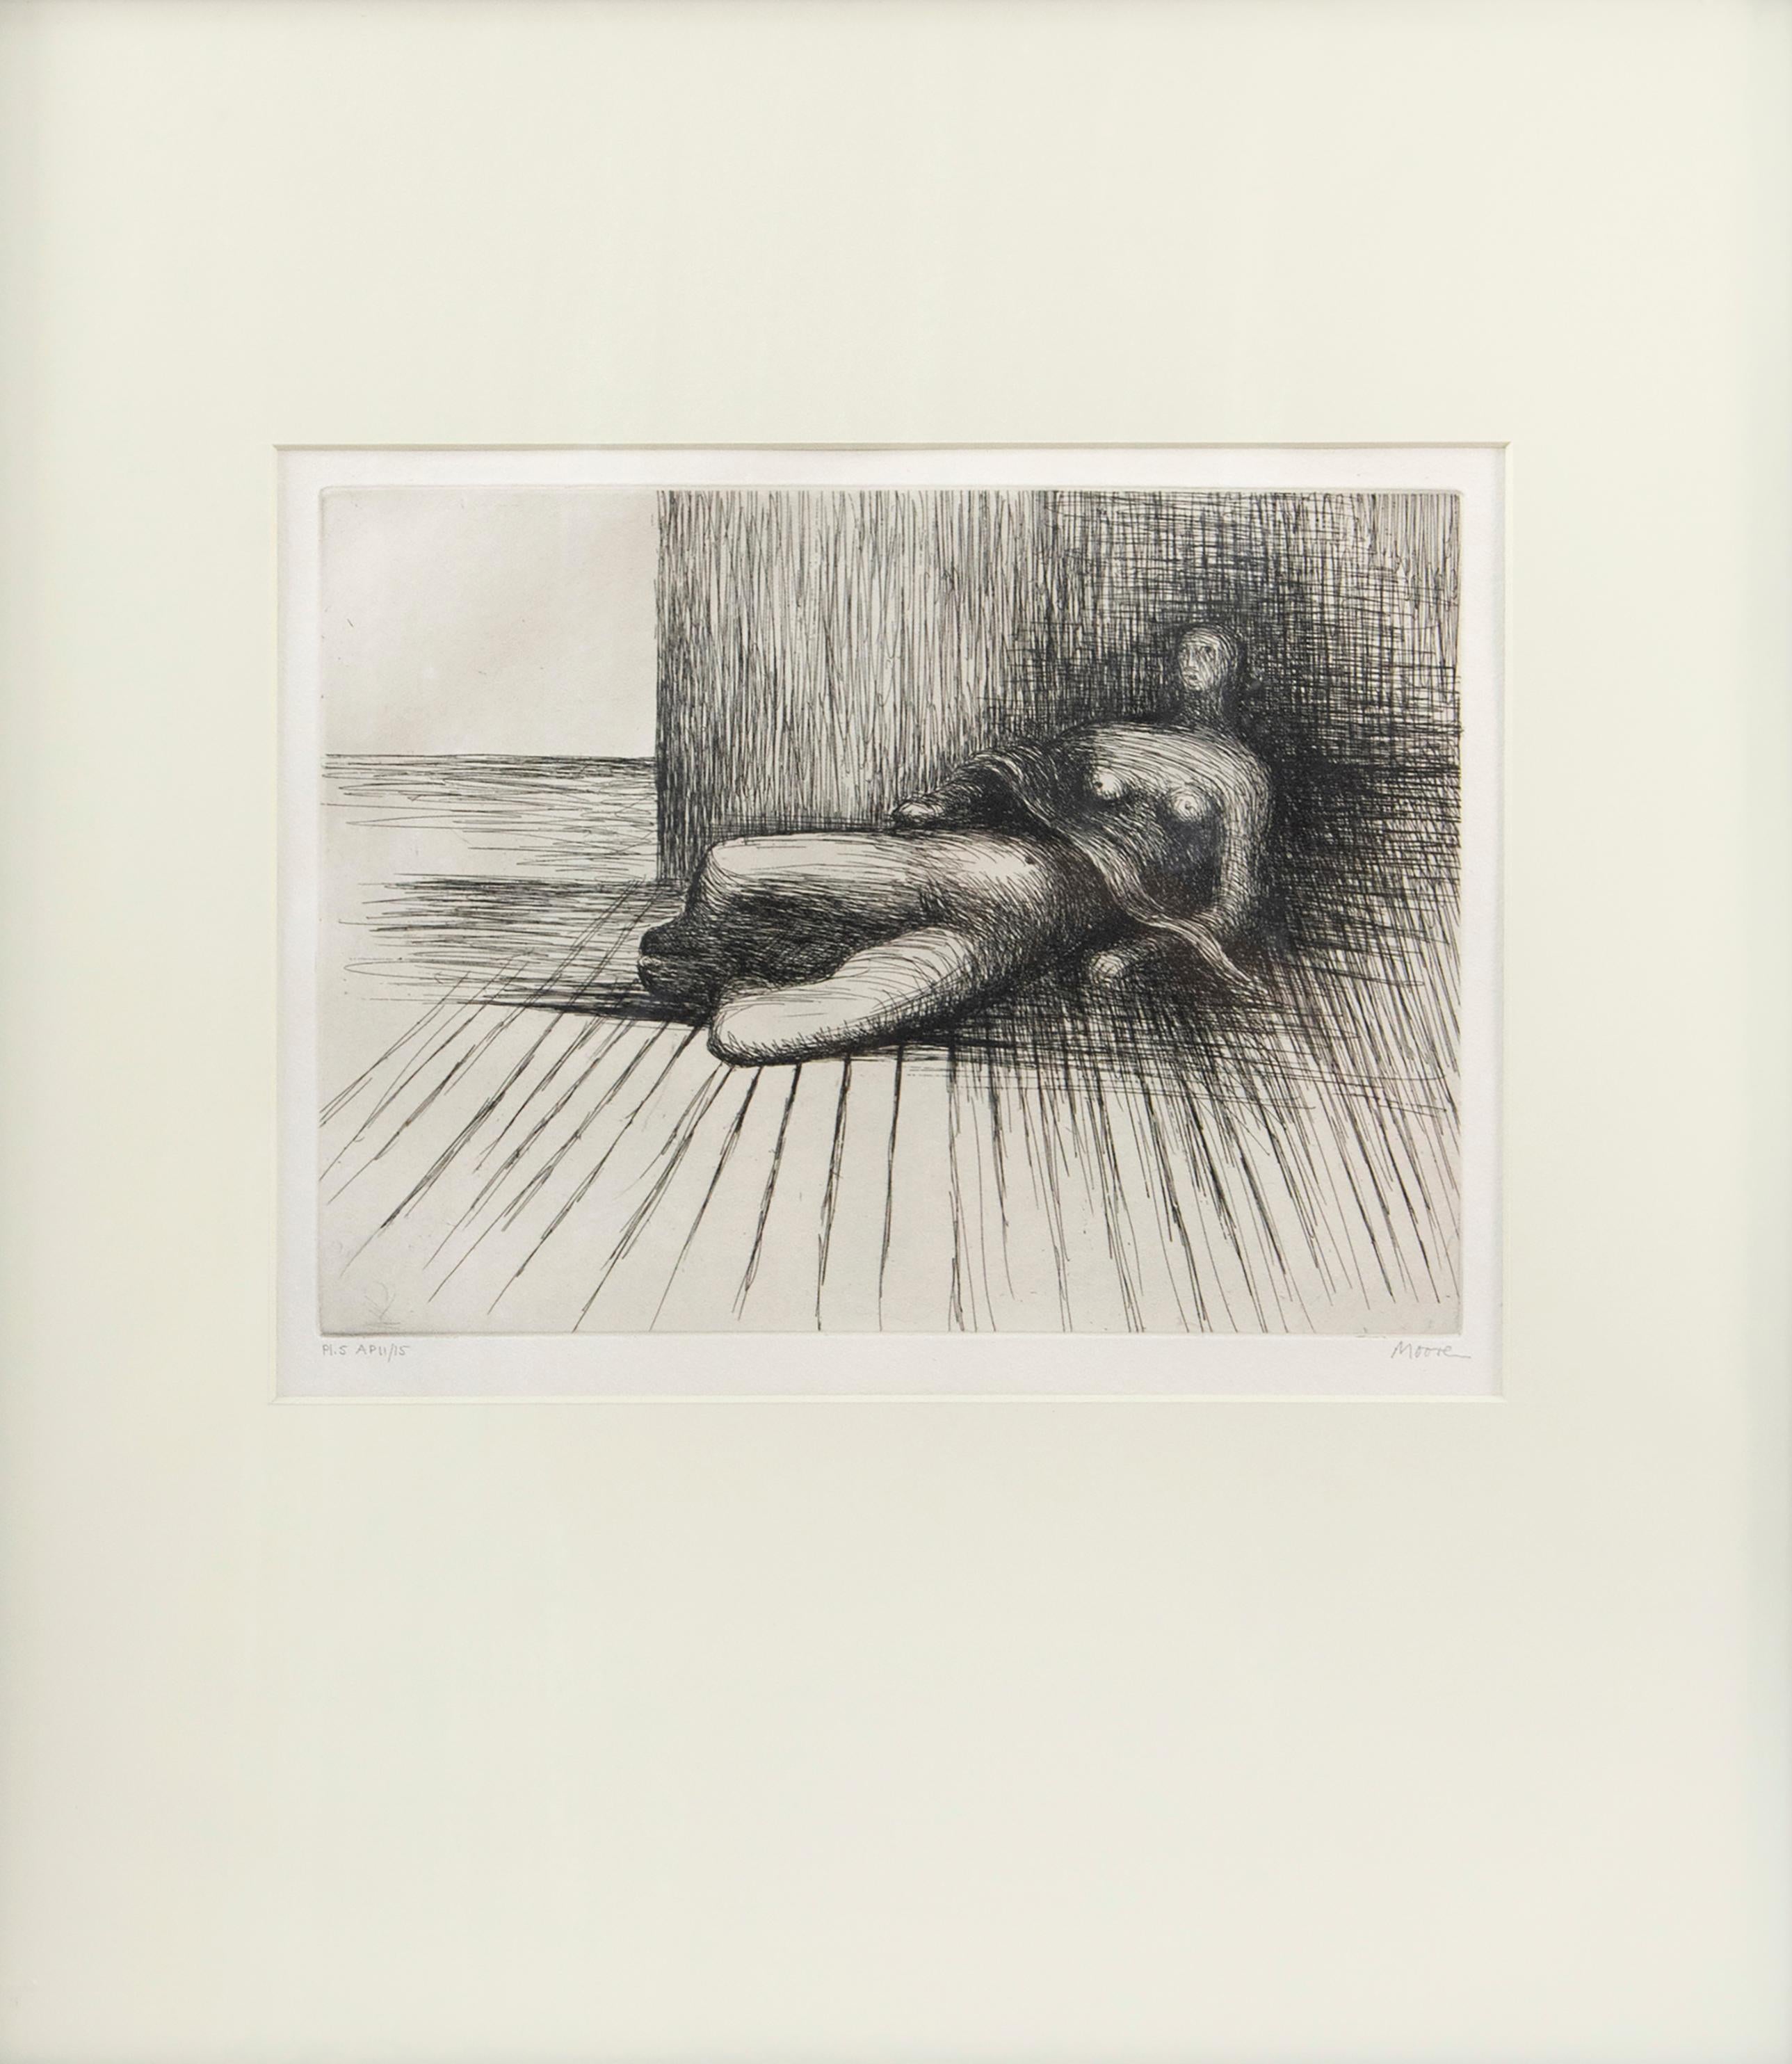 The Reclining Figure - Abstract Print by Henry Moore